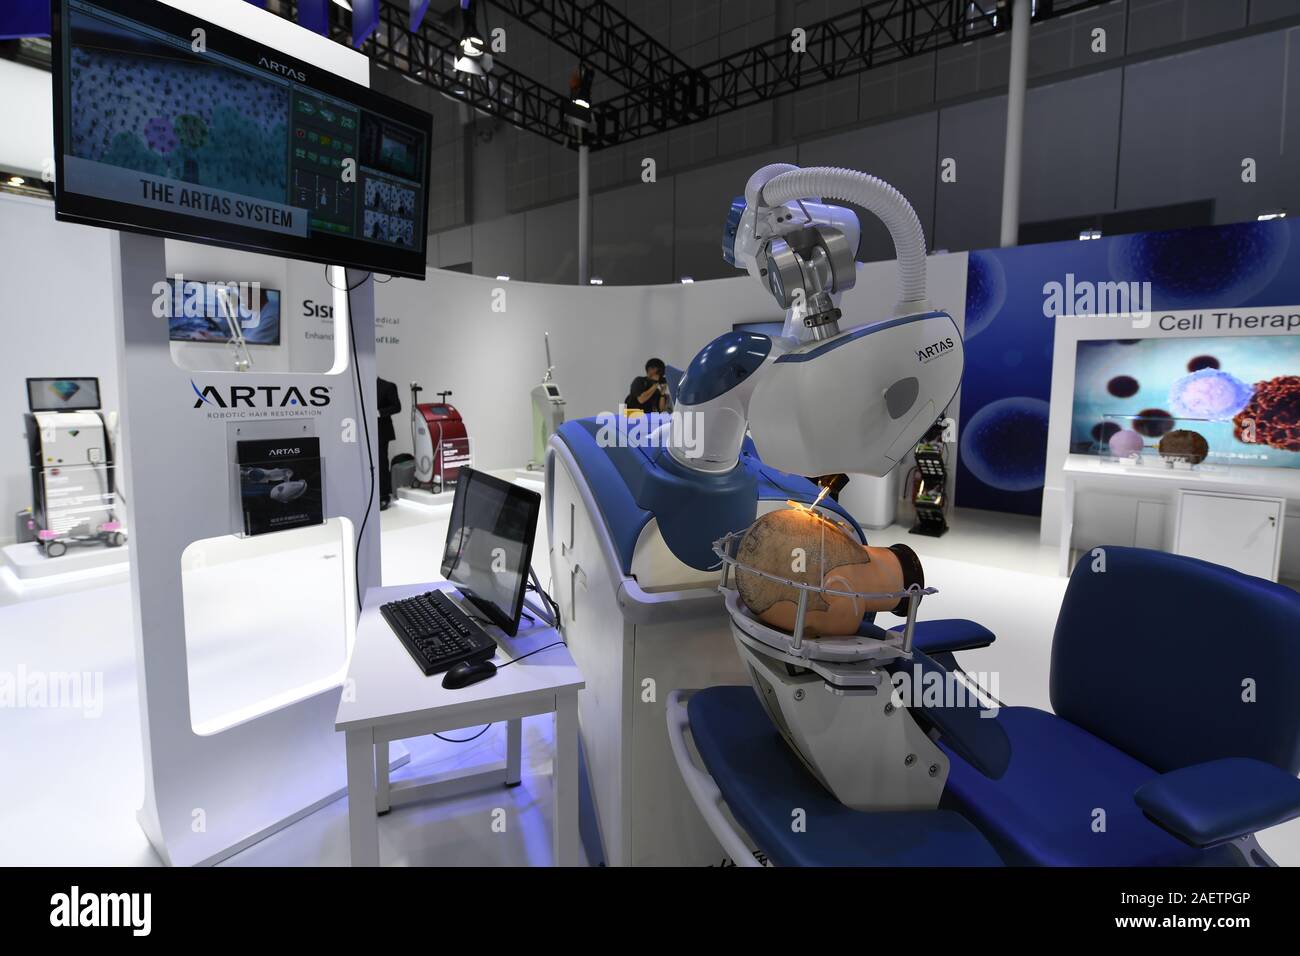 A hair transplant robot does hair transplant surgery on a model at the 2nd China International Import Expo (CIIE) in Shanghai, China, 5 November 2019. Stock Photo